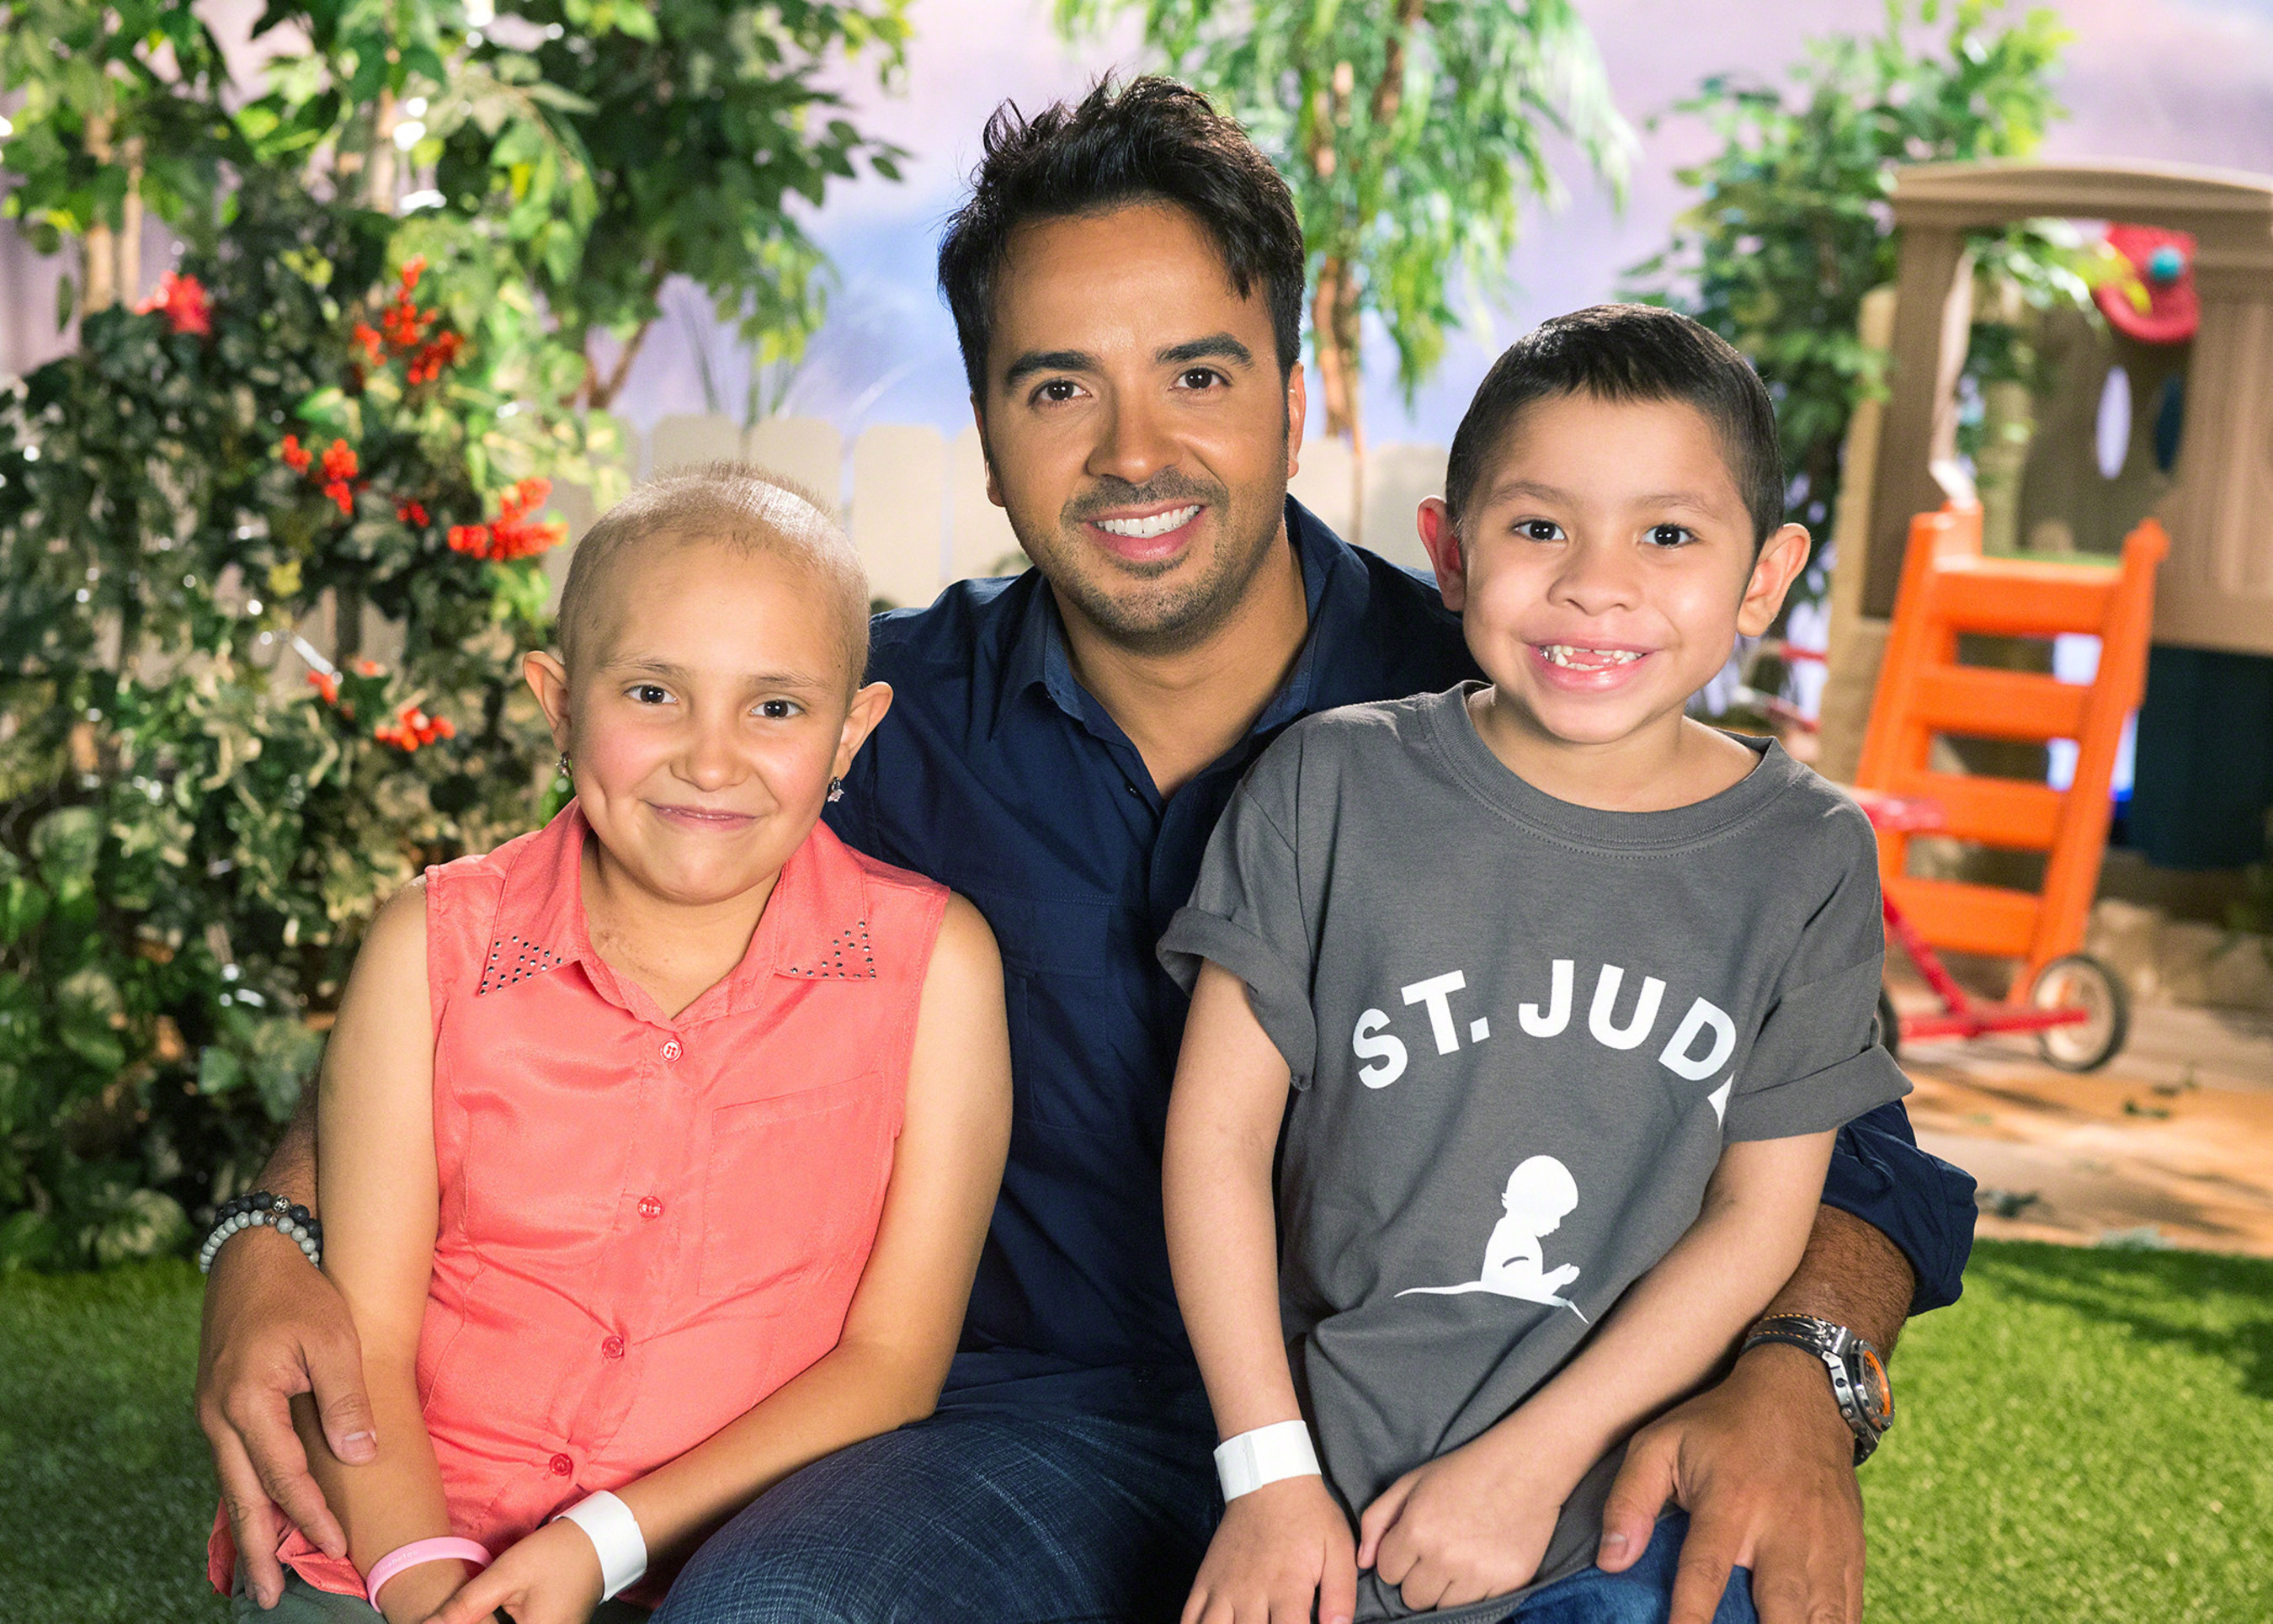 St. Jude supporter Luis Fonsi next to St. Jude patients Olivia and Elias.